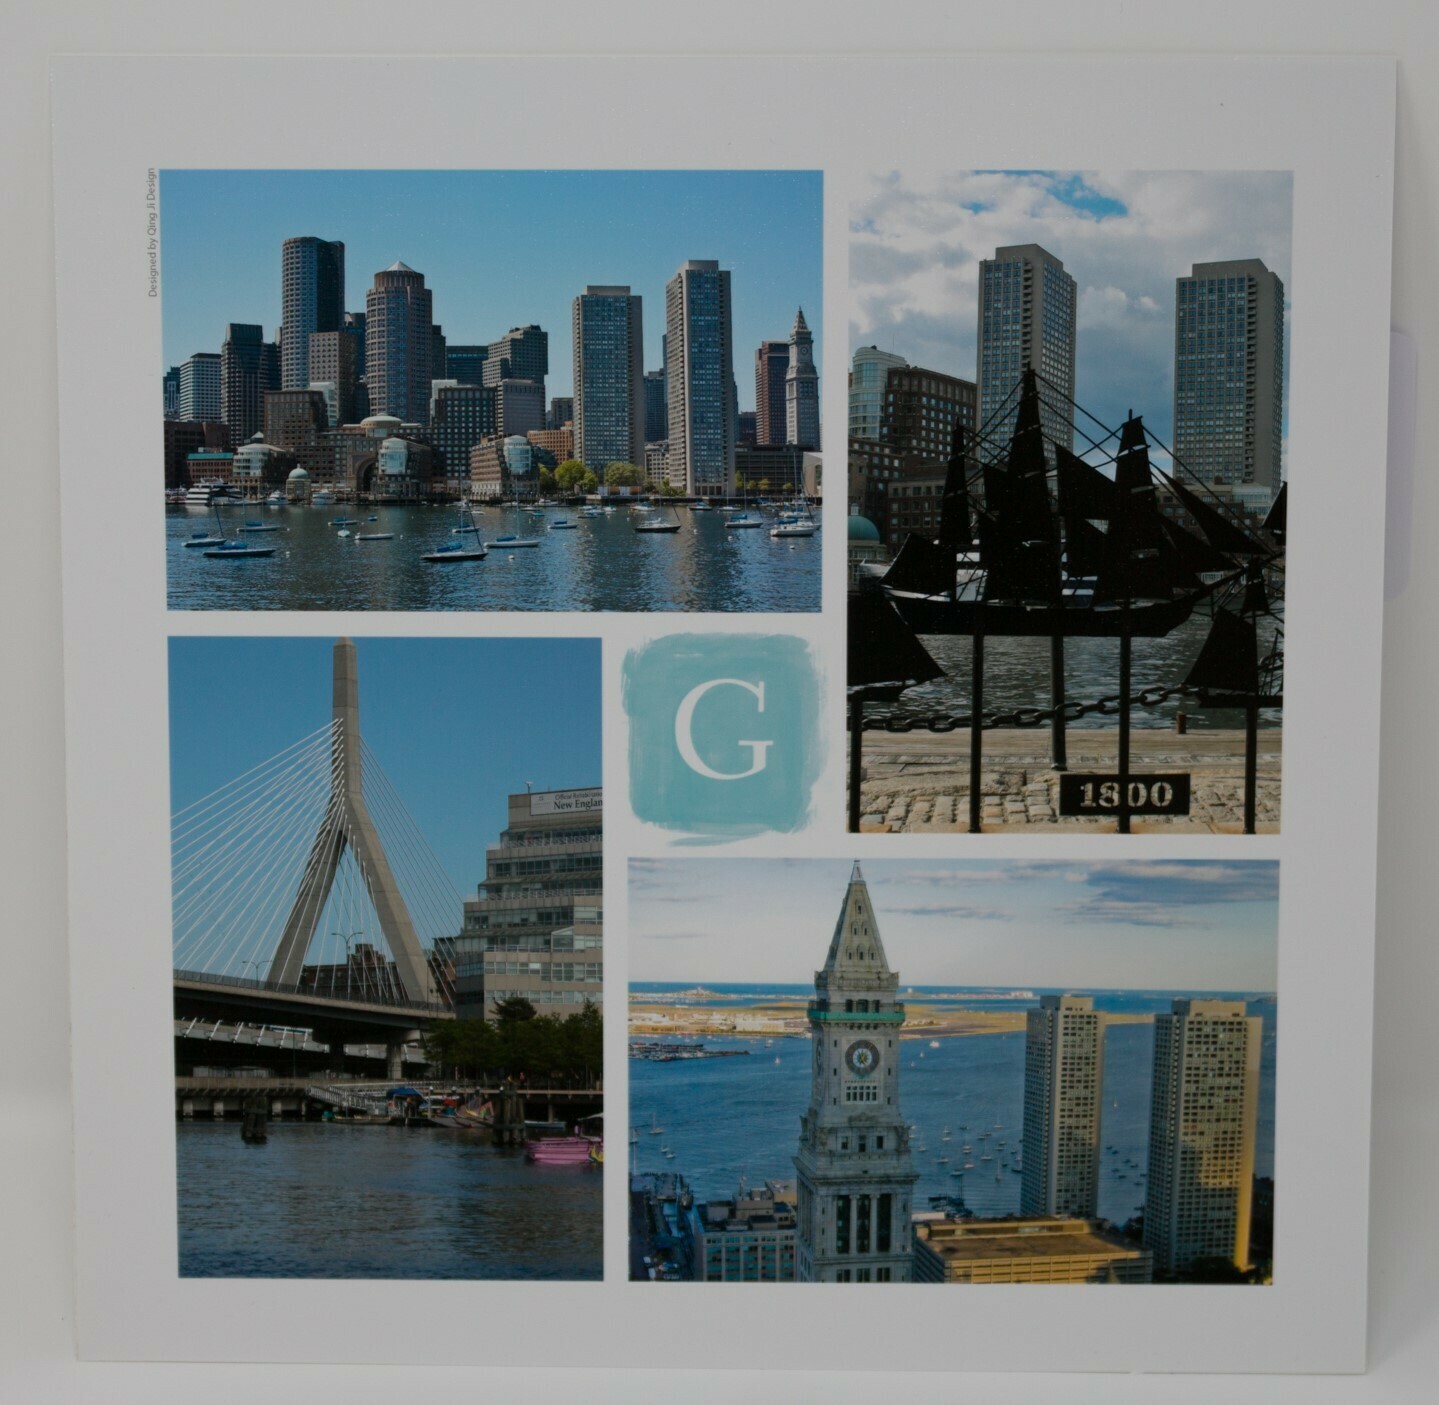 10"x10" Matted Photo Collage of Boston Sky-Line